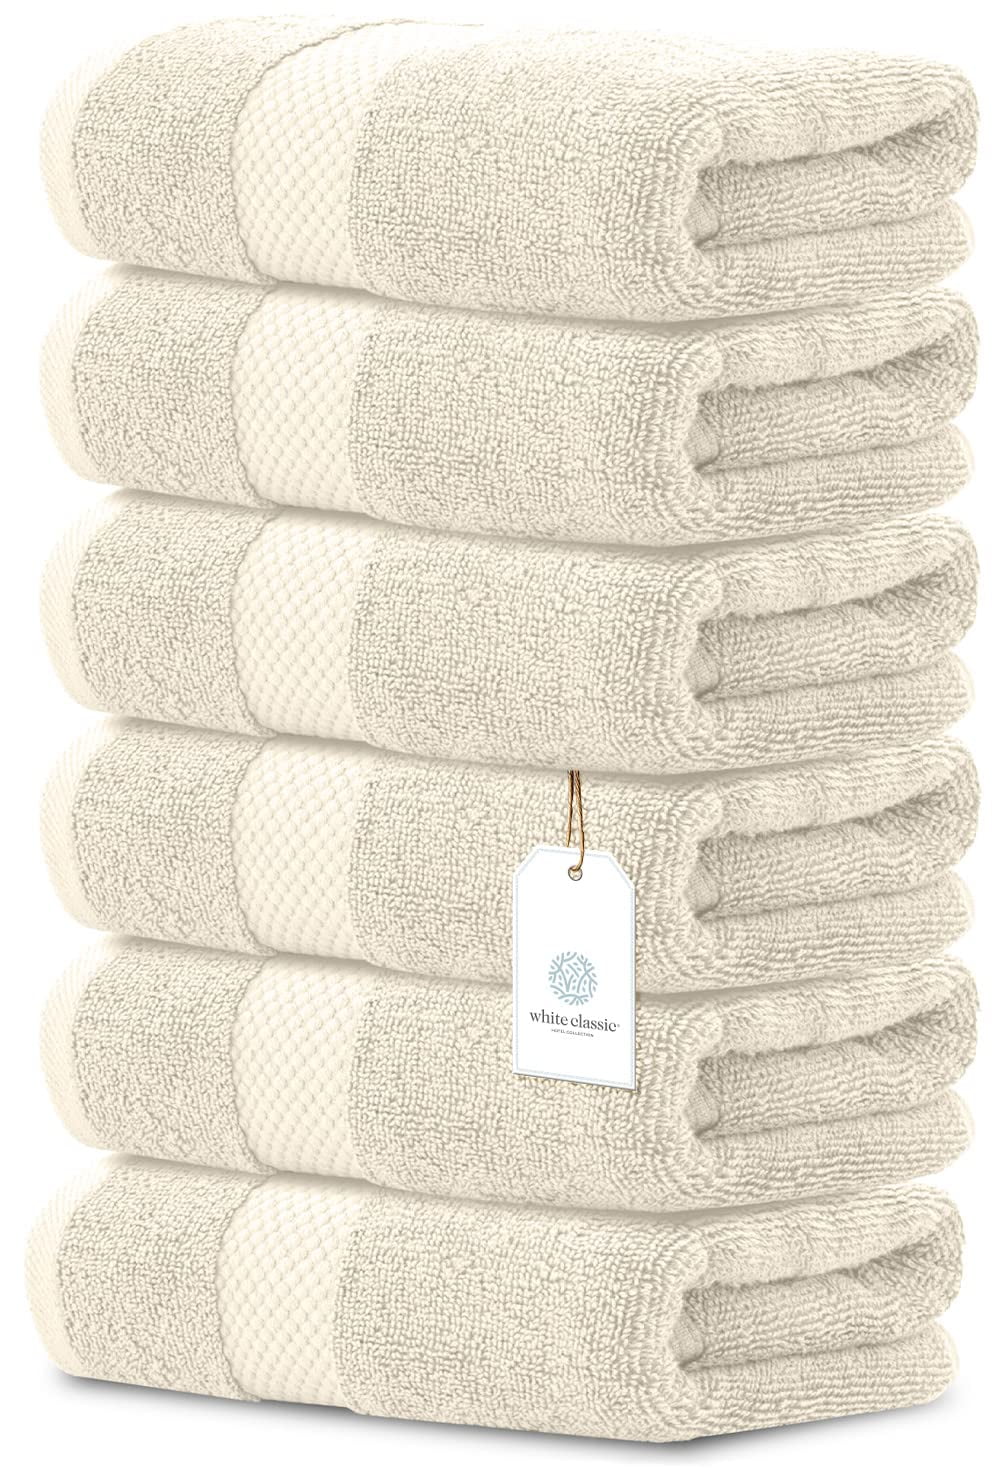 Luxury White Bath Towels Large - Circlet Egyptian Cotton | Highly Absorbent  Hotel spa Collection Bathroom Towel | 30x56 Inch | Set of 2